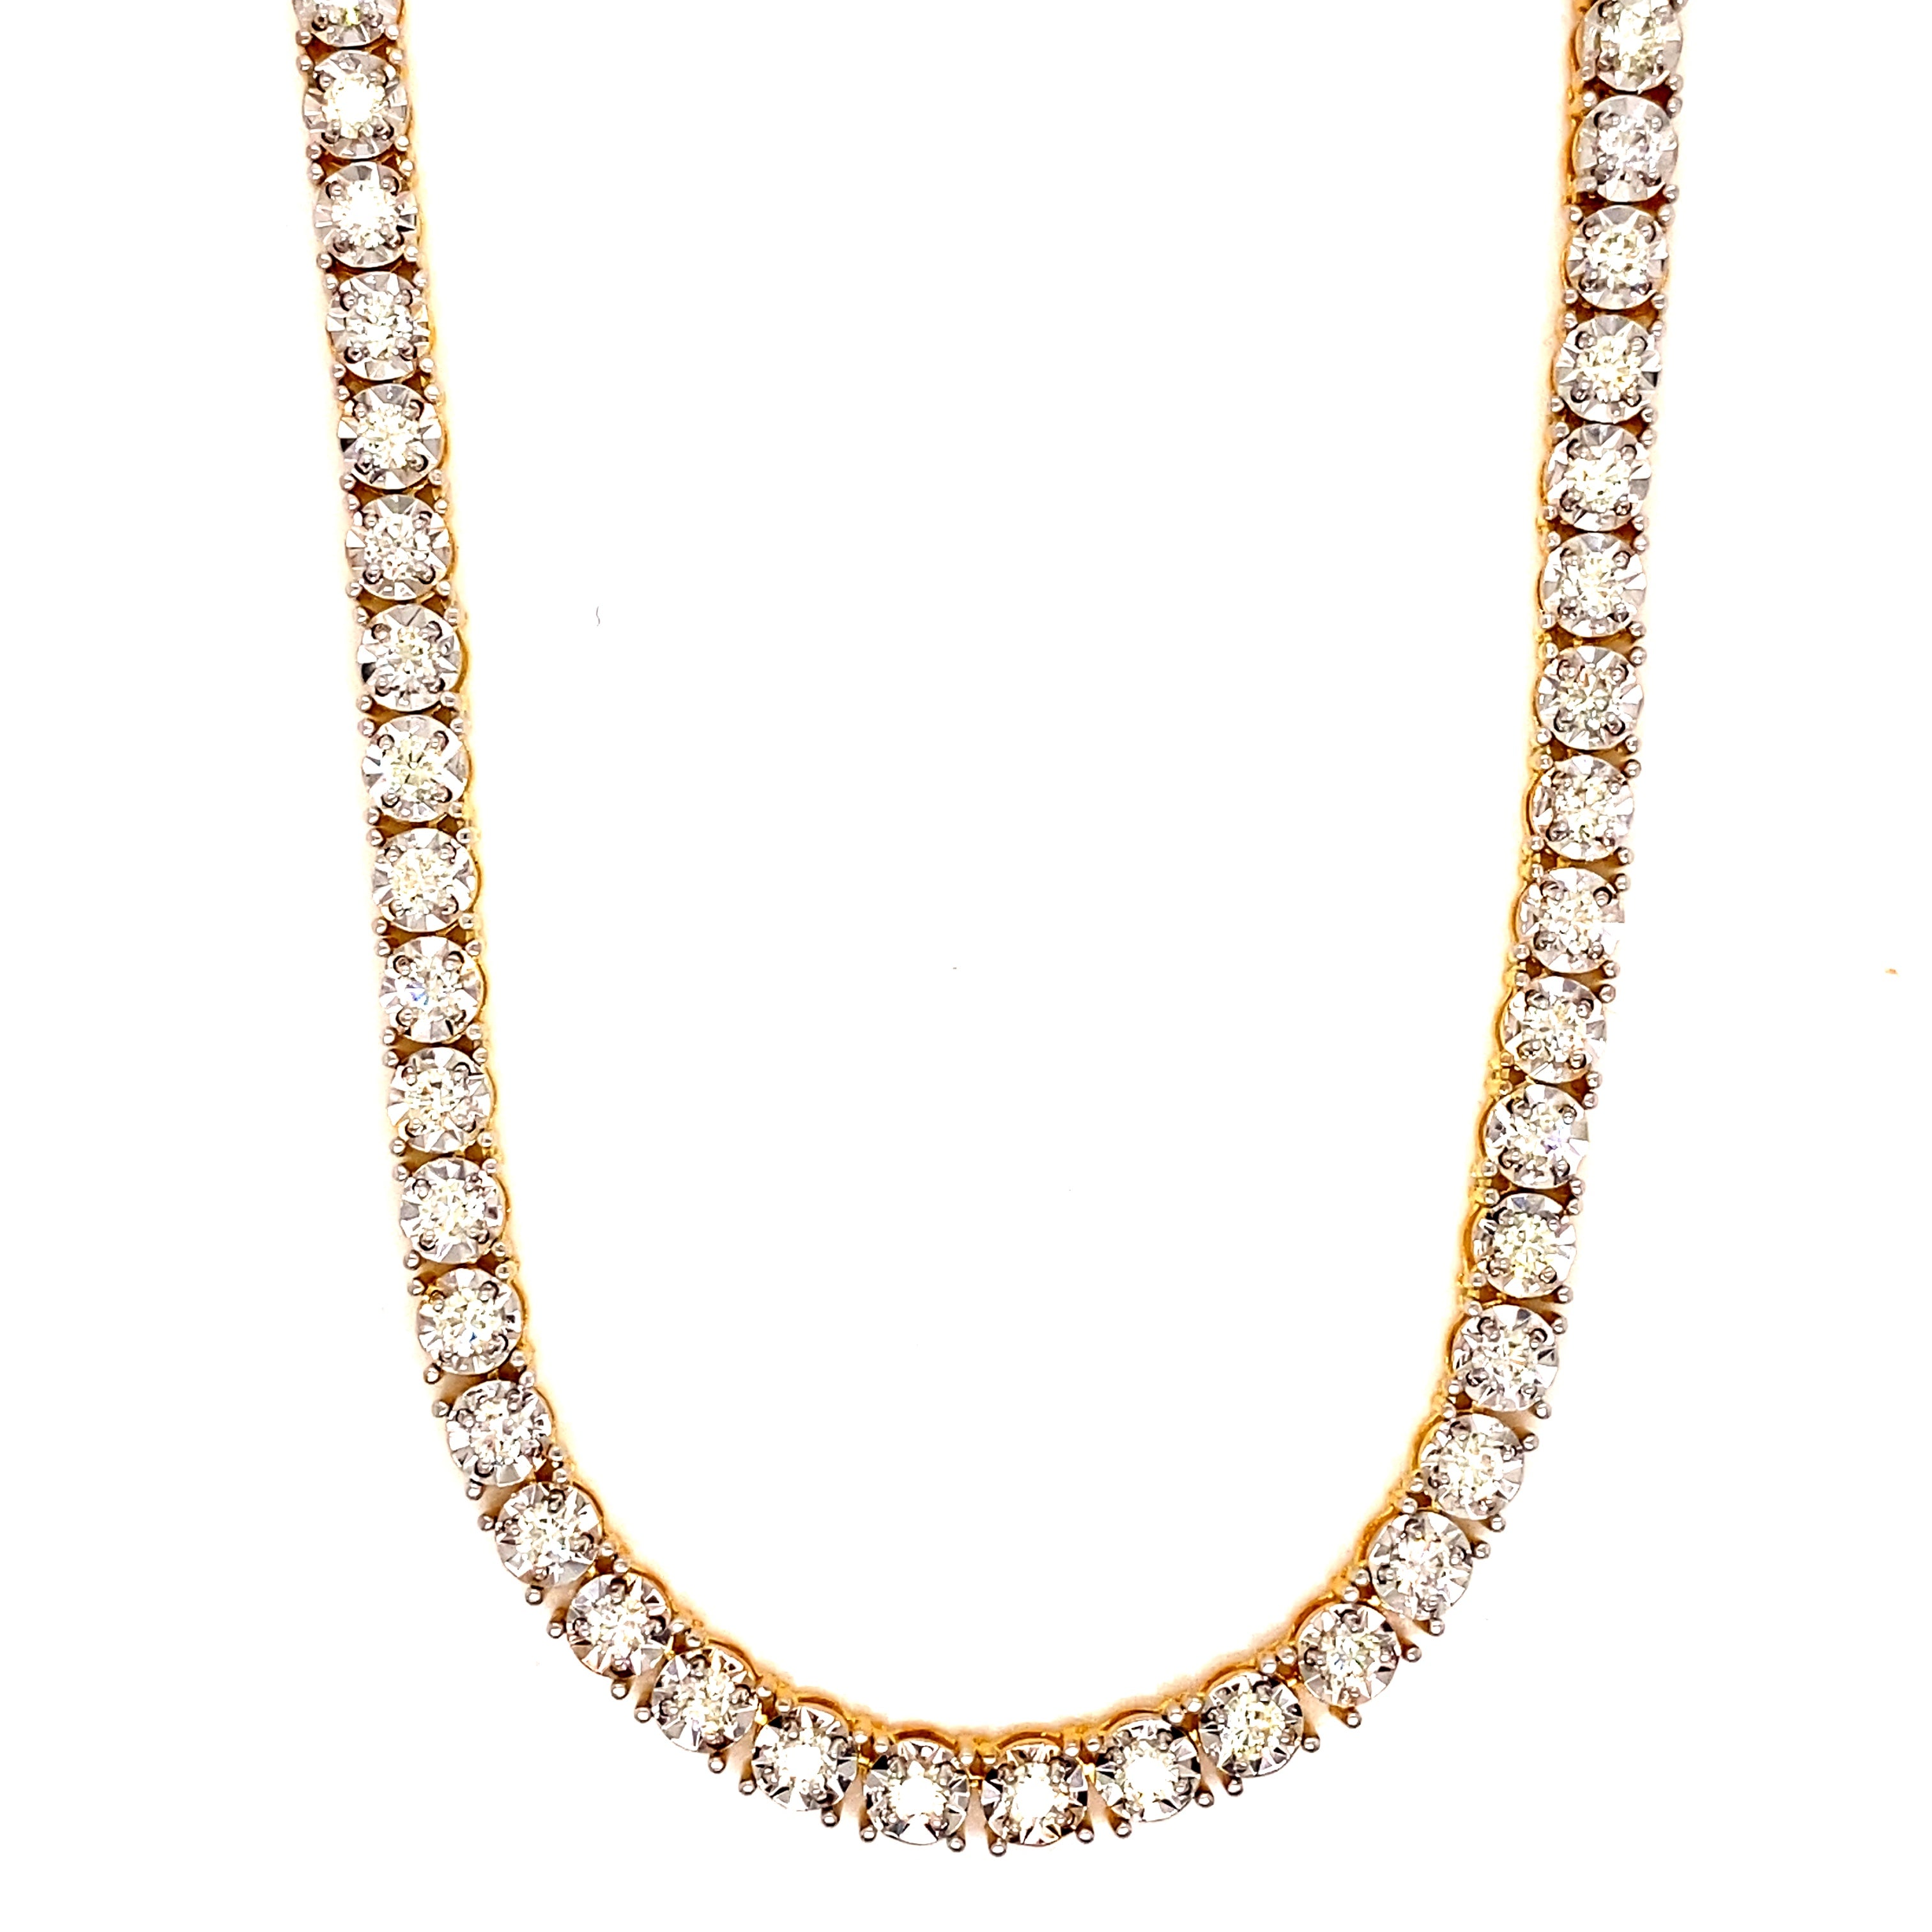 Buy Black Sterling Silver Black Diamond Tennis Chain 13.07ct 20-32' Online  at SO ICY JEWELRY